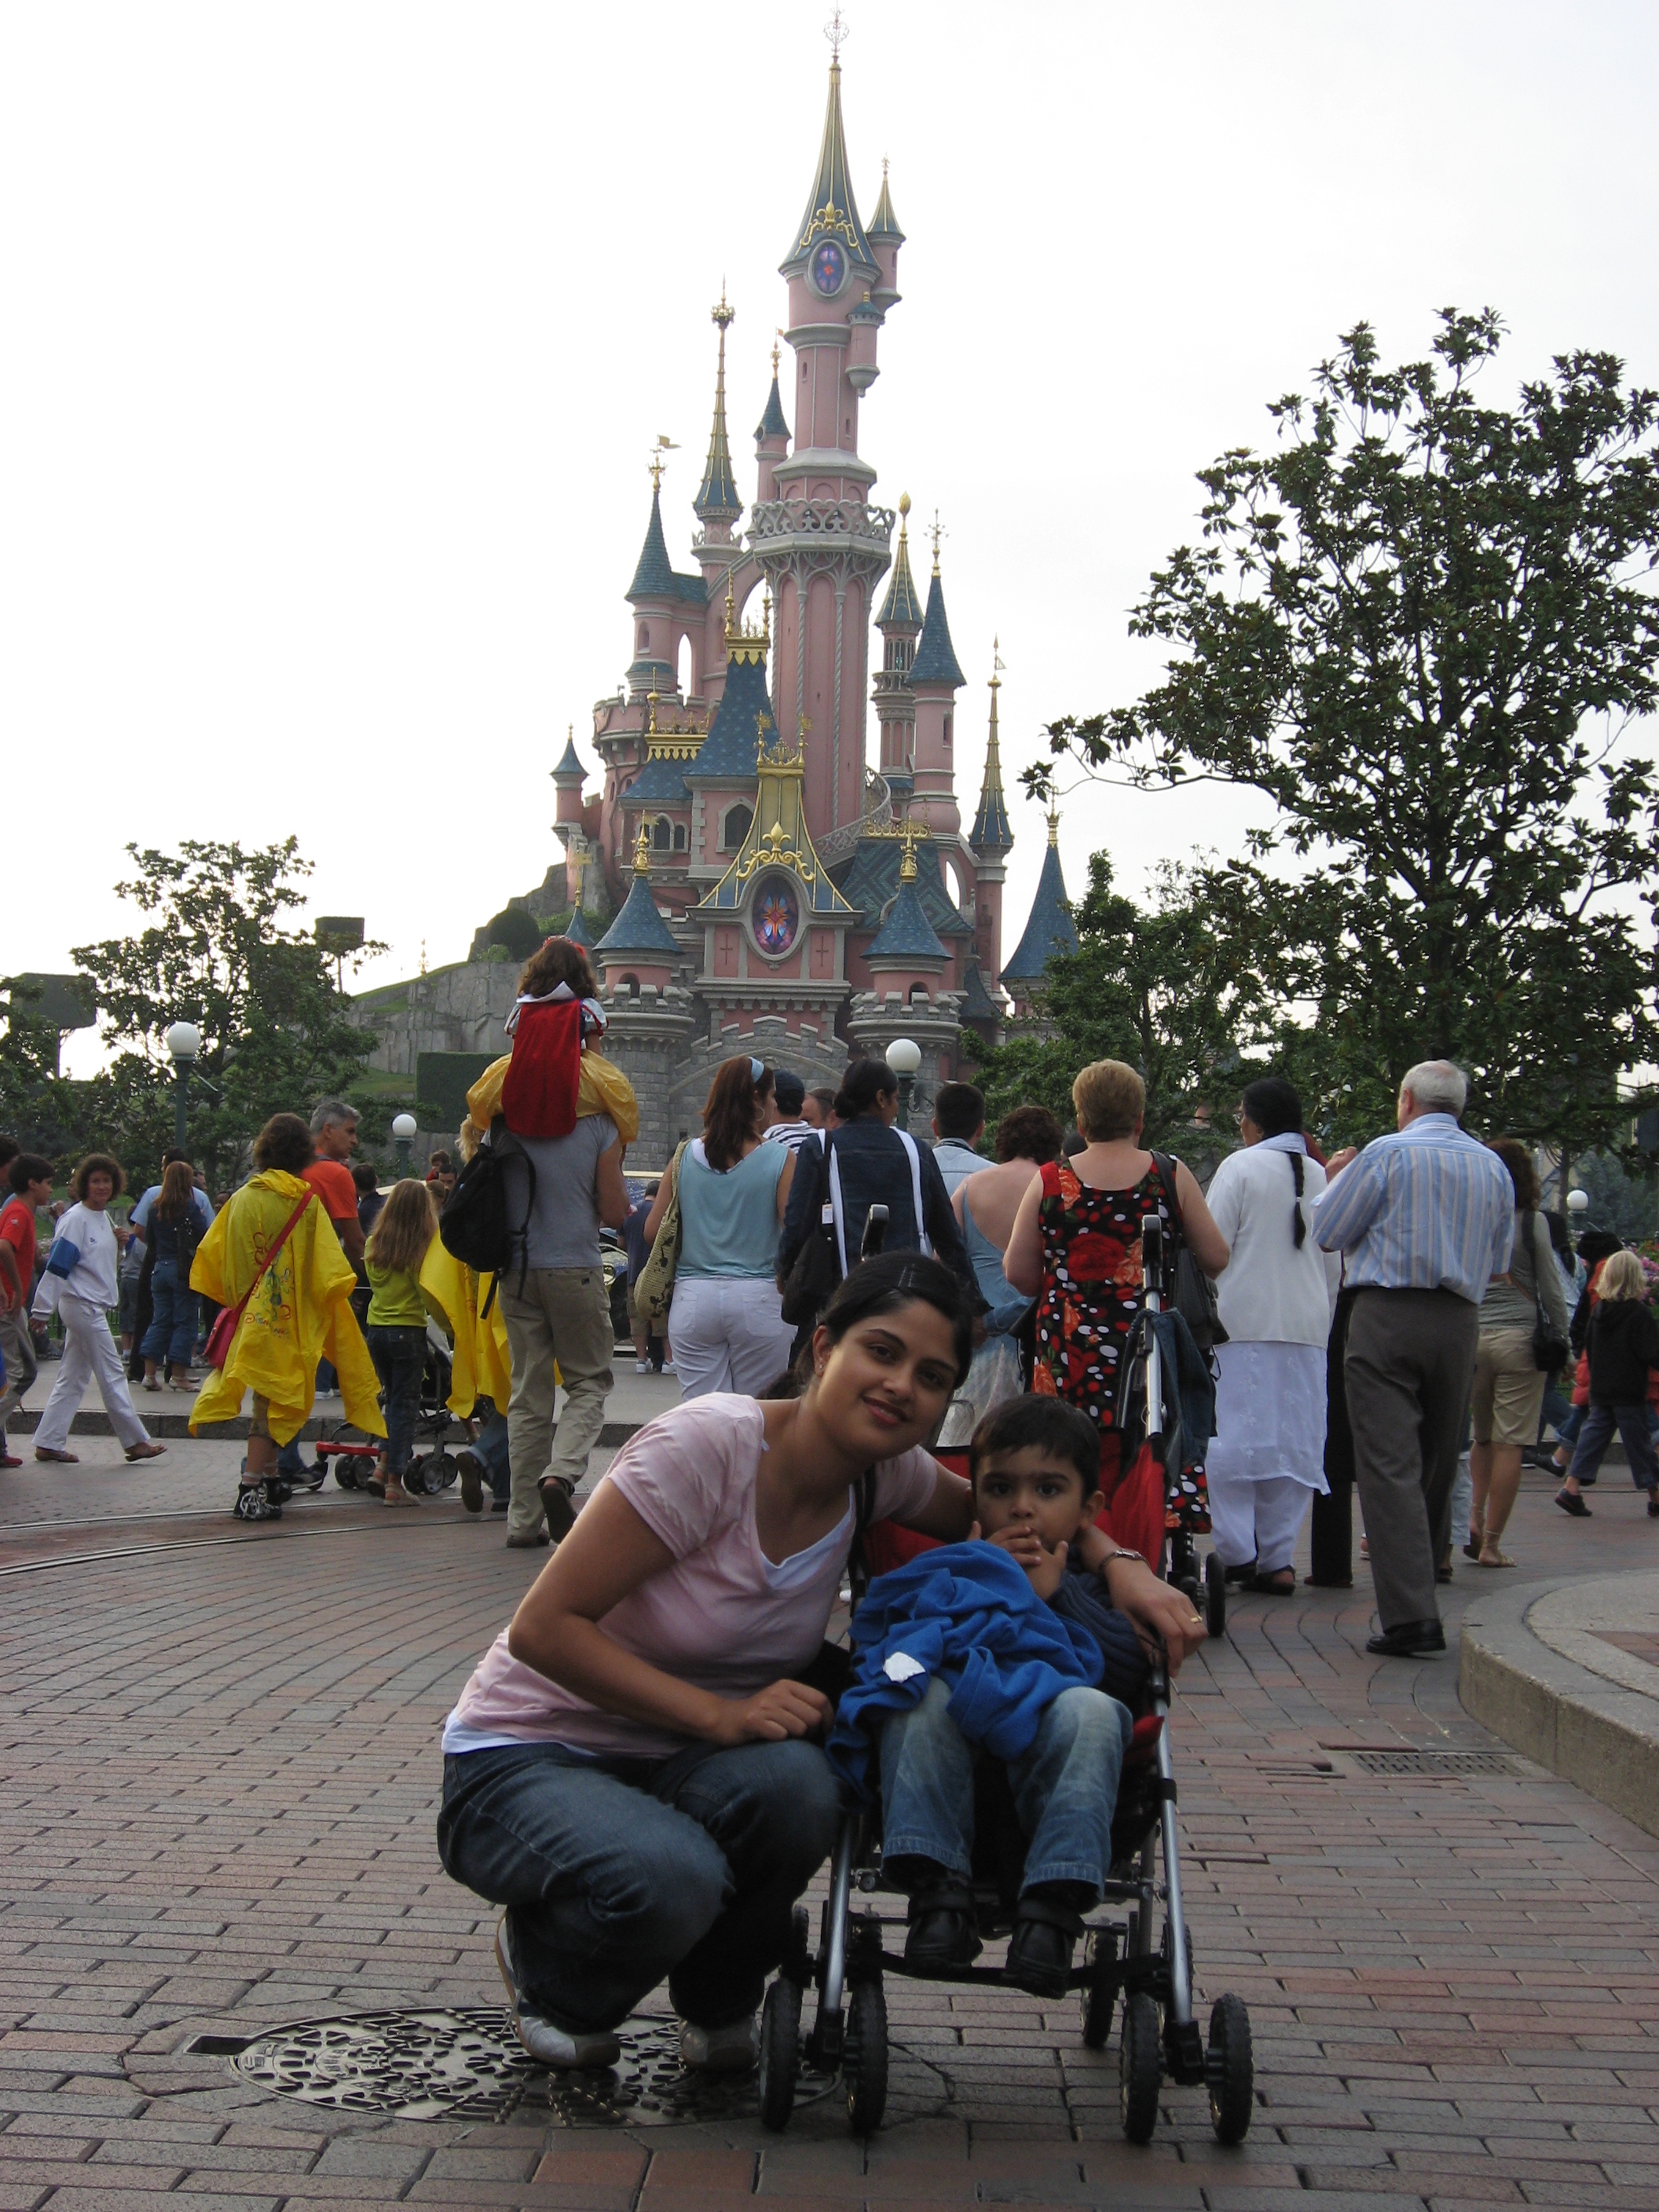 The Best Age To Take Kids To Disney World